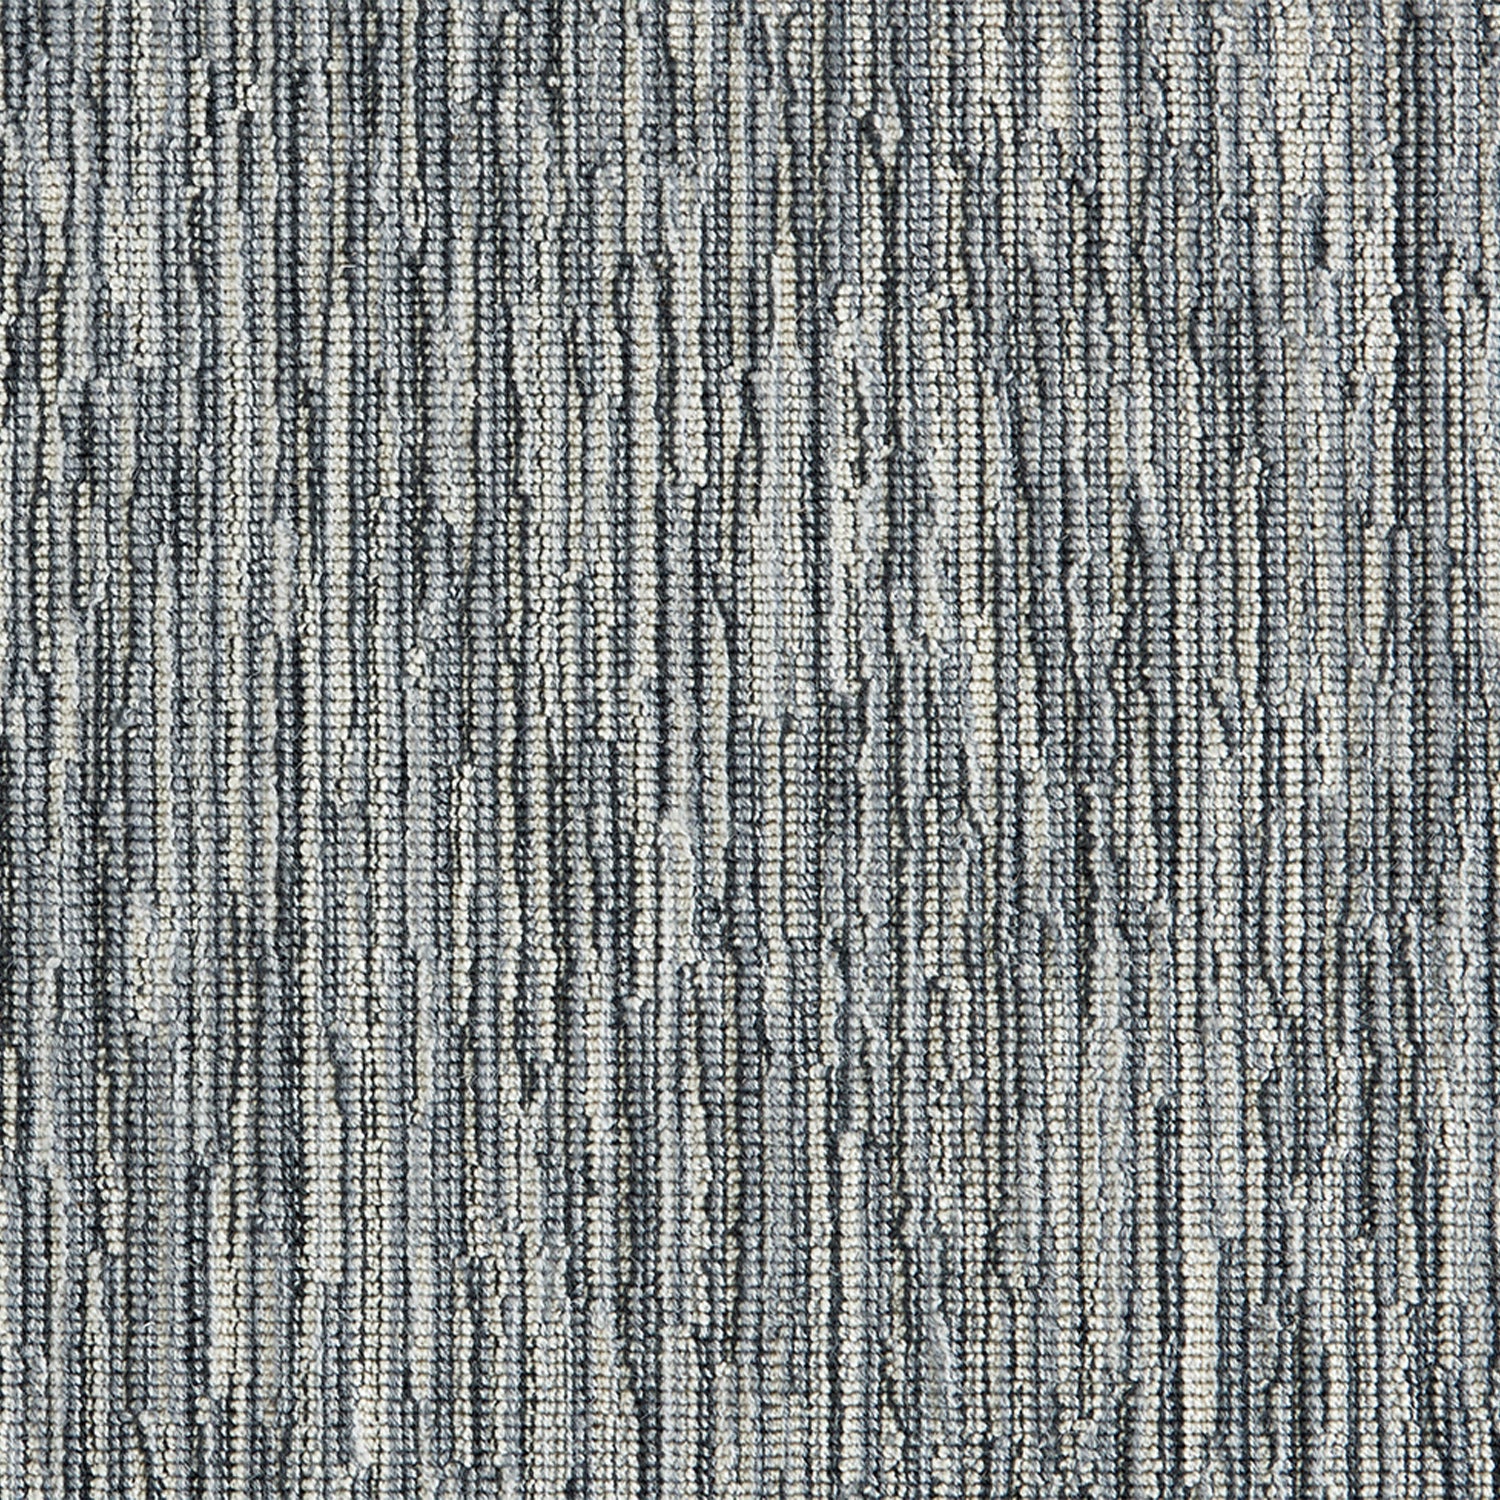 Wool-blend broadloom carpet swatch in a mottled stripe print in shades of gray, blue and black.